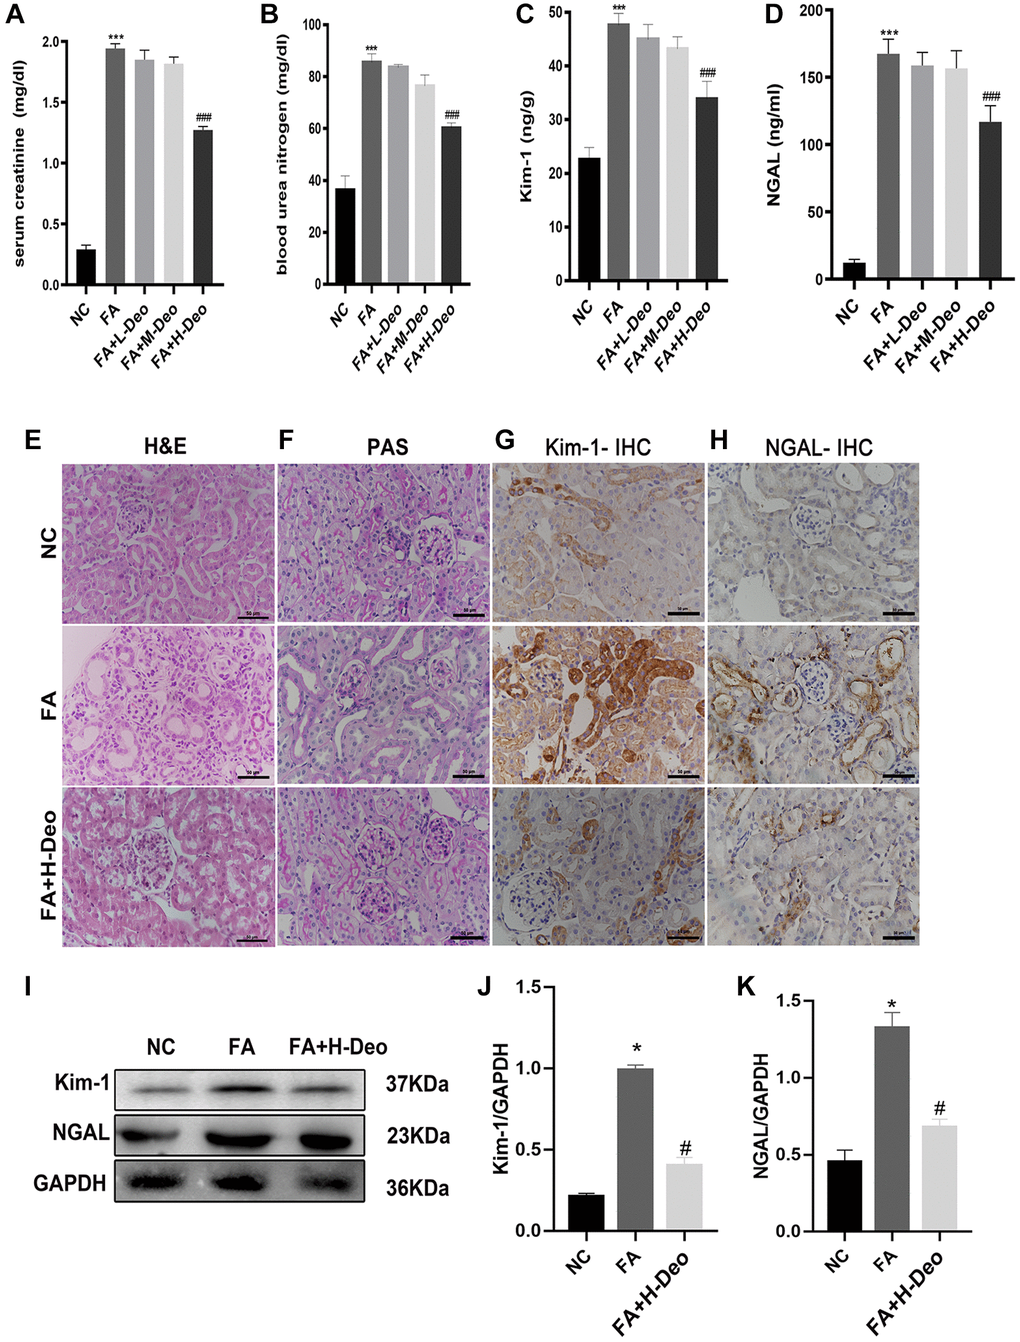 2’-deoxyadenosine administration attenuated the development of FA-induced AKI in mice. (A, B) Renal function of all mice was assessed by SCr and BUN. (C, D) Kim-1 and NGAL results of the mice were measured by ELISA. (E, F) Representative H&E and PAS of renal tissues obtained from specimens in different group. (G, H) Expression of Kim-1 and NGAL was determined by IHC. (I–K) Protein levels of NGAL and Kim-1 protein expression in the kidney were evaluated by western blot analysis. *P indicates a significant difference between the NC group and the FA group. #P represents the difference between the FA+Deo group and the FA group. P 